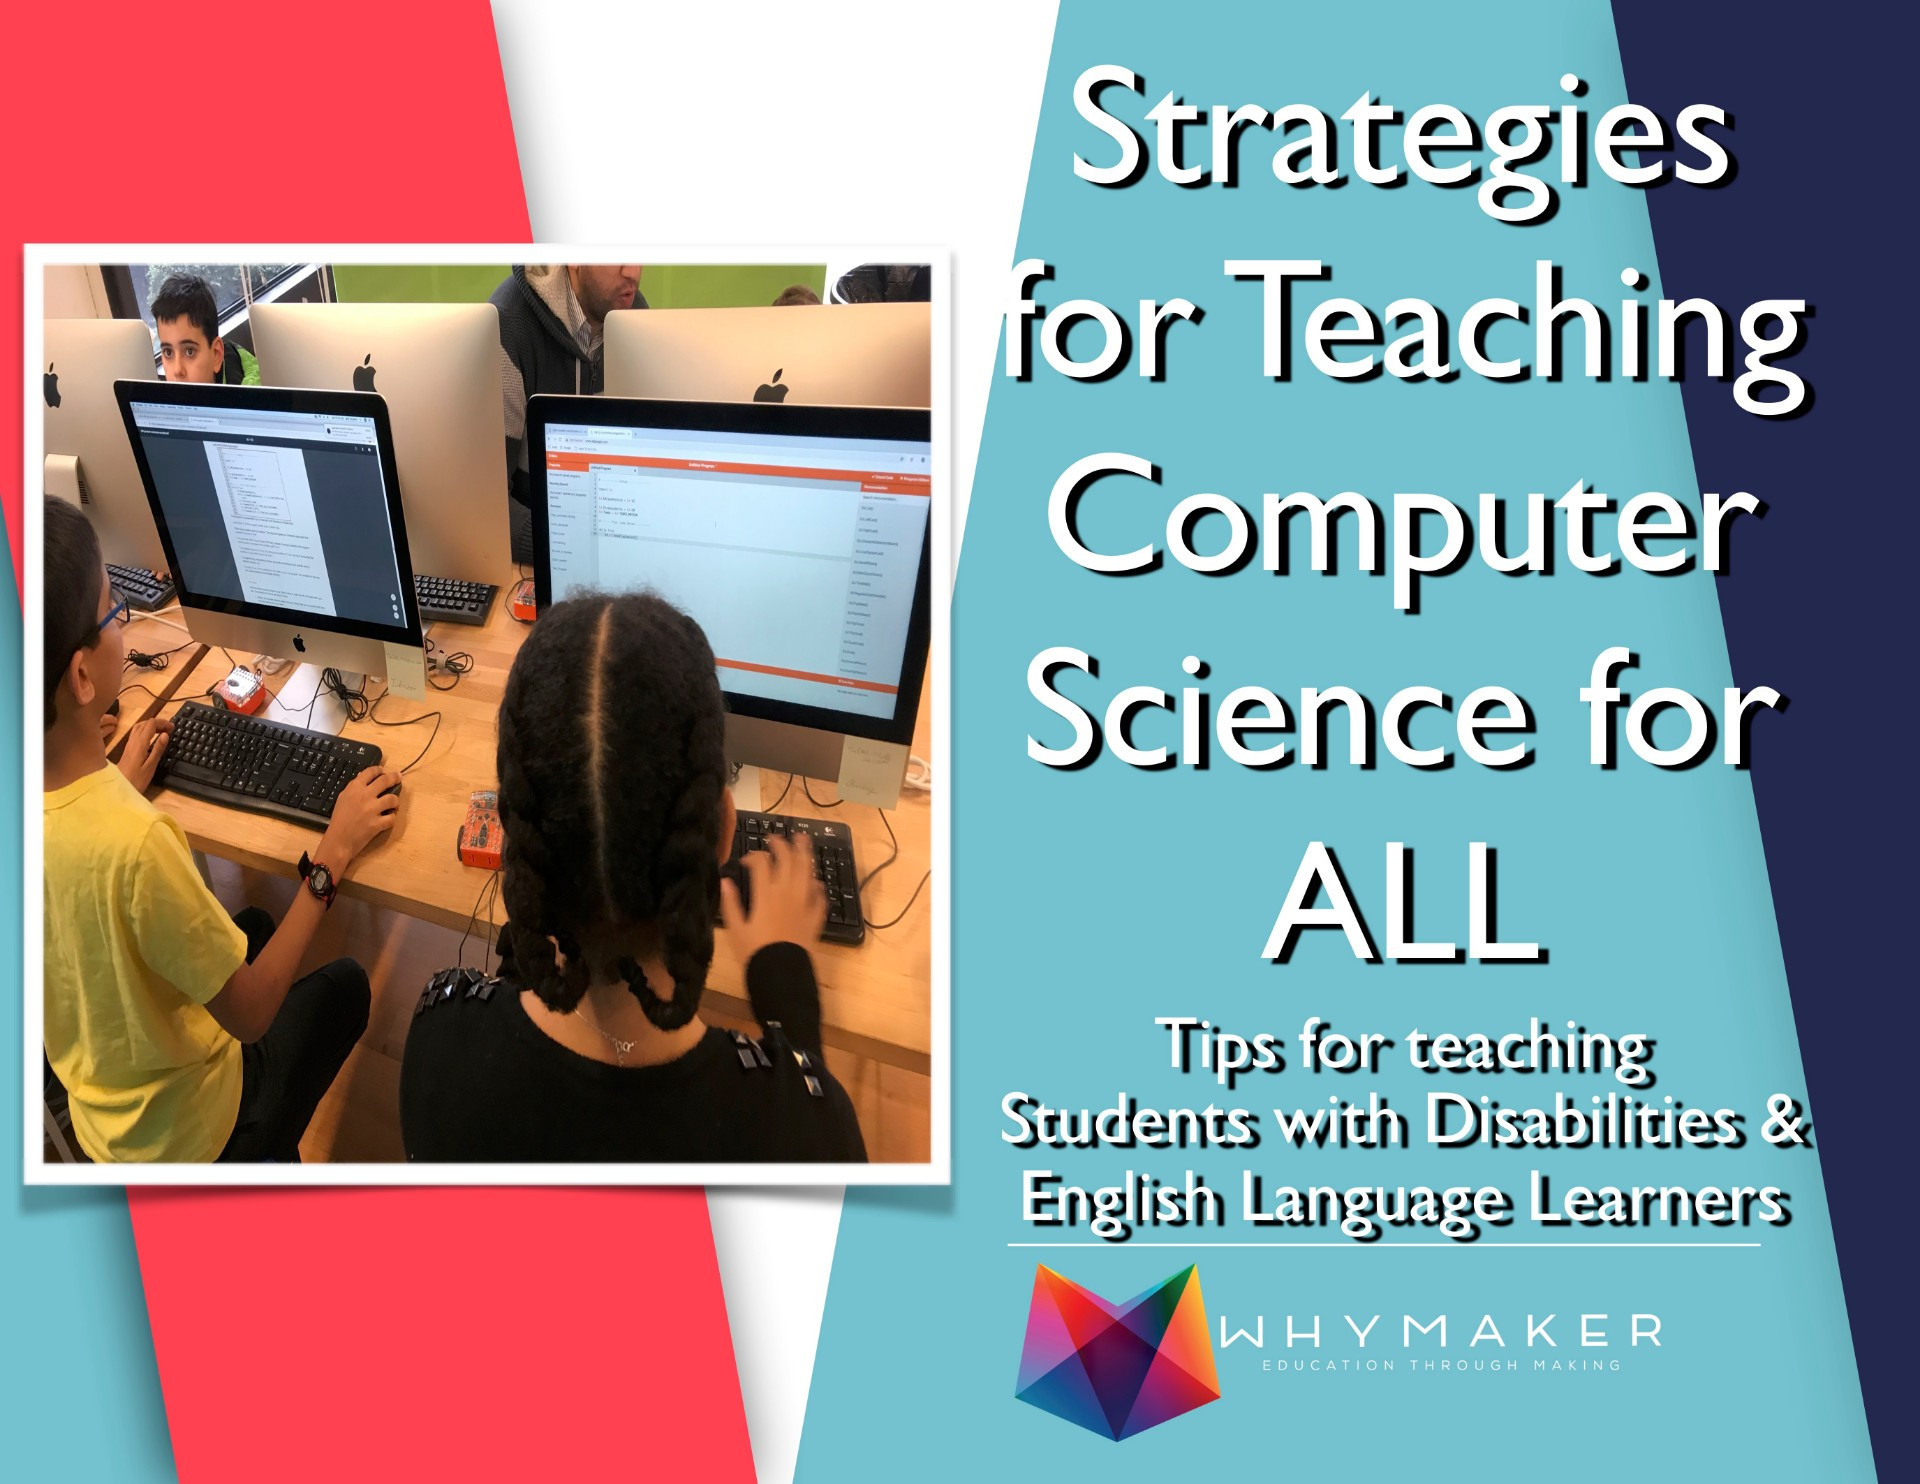 5 Ways to Make Computer Science More Accessible to All Students